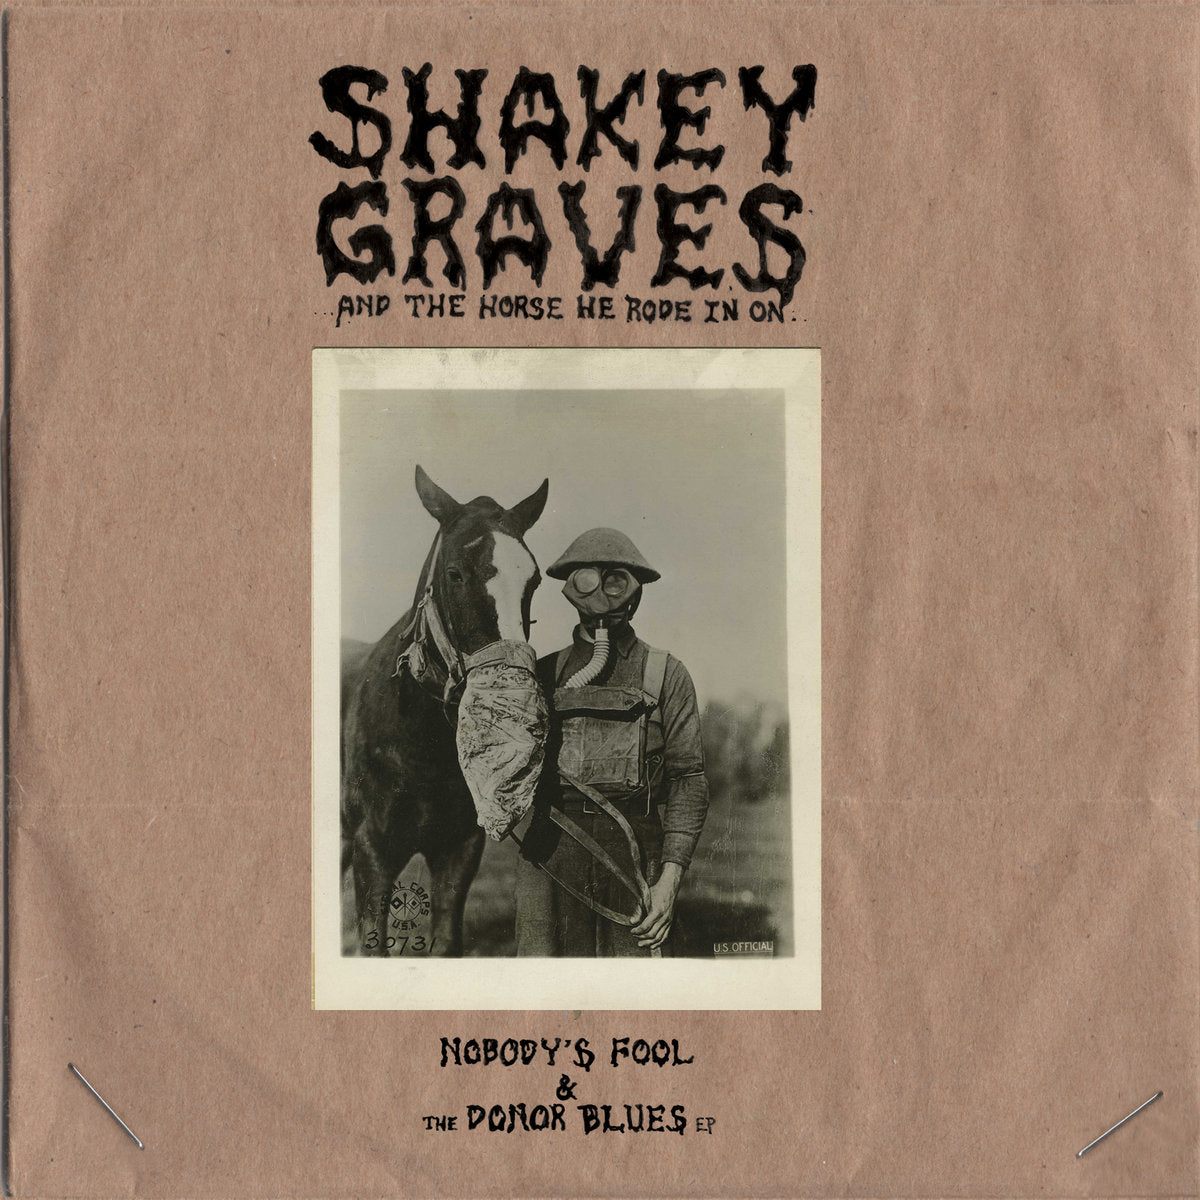 Shakey Graves & The Horse He Rode In On (Nobody's Fool & The Dono)